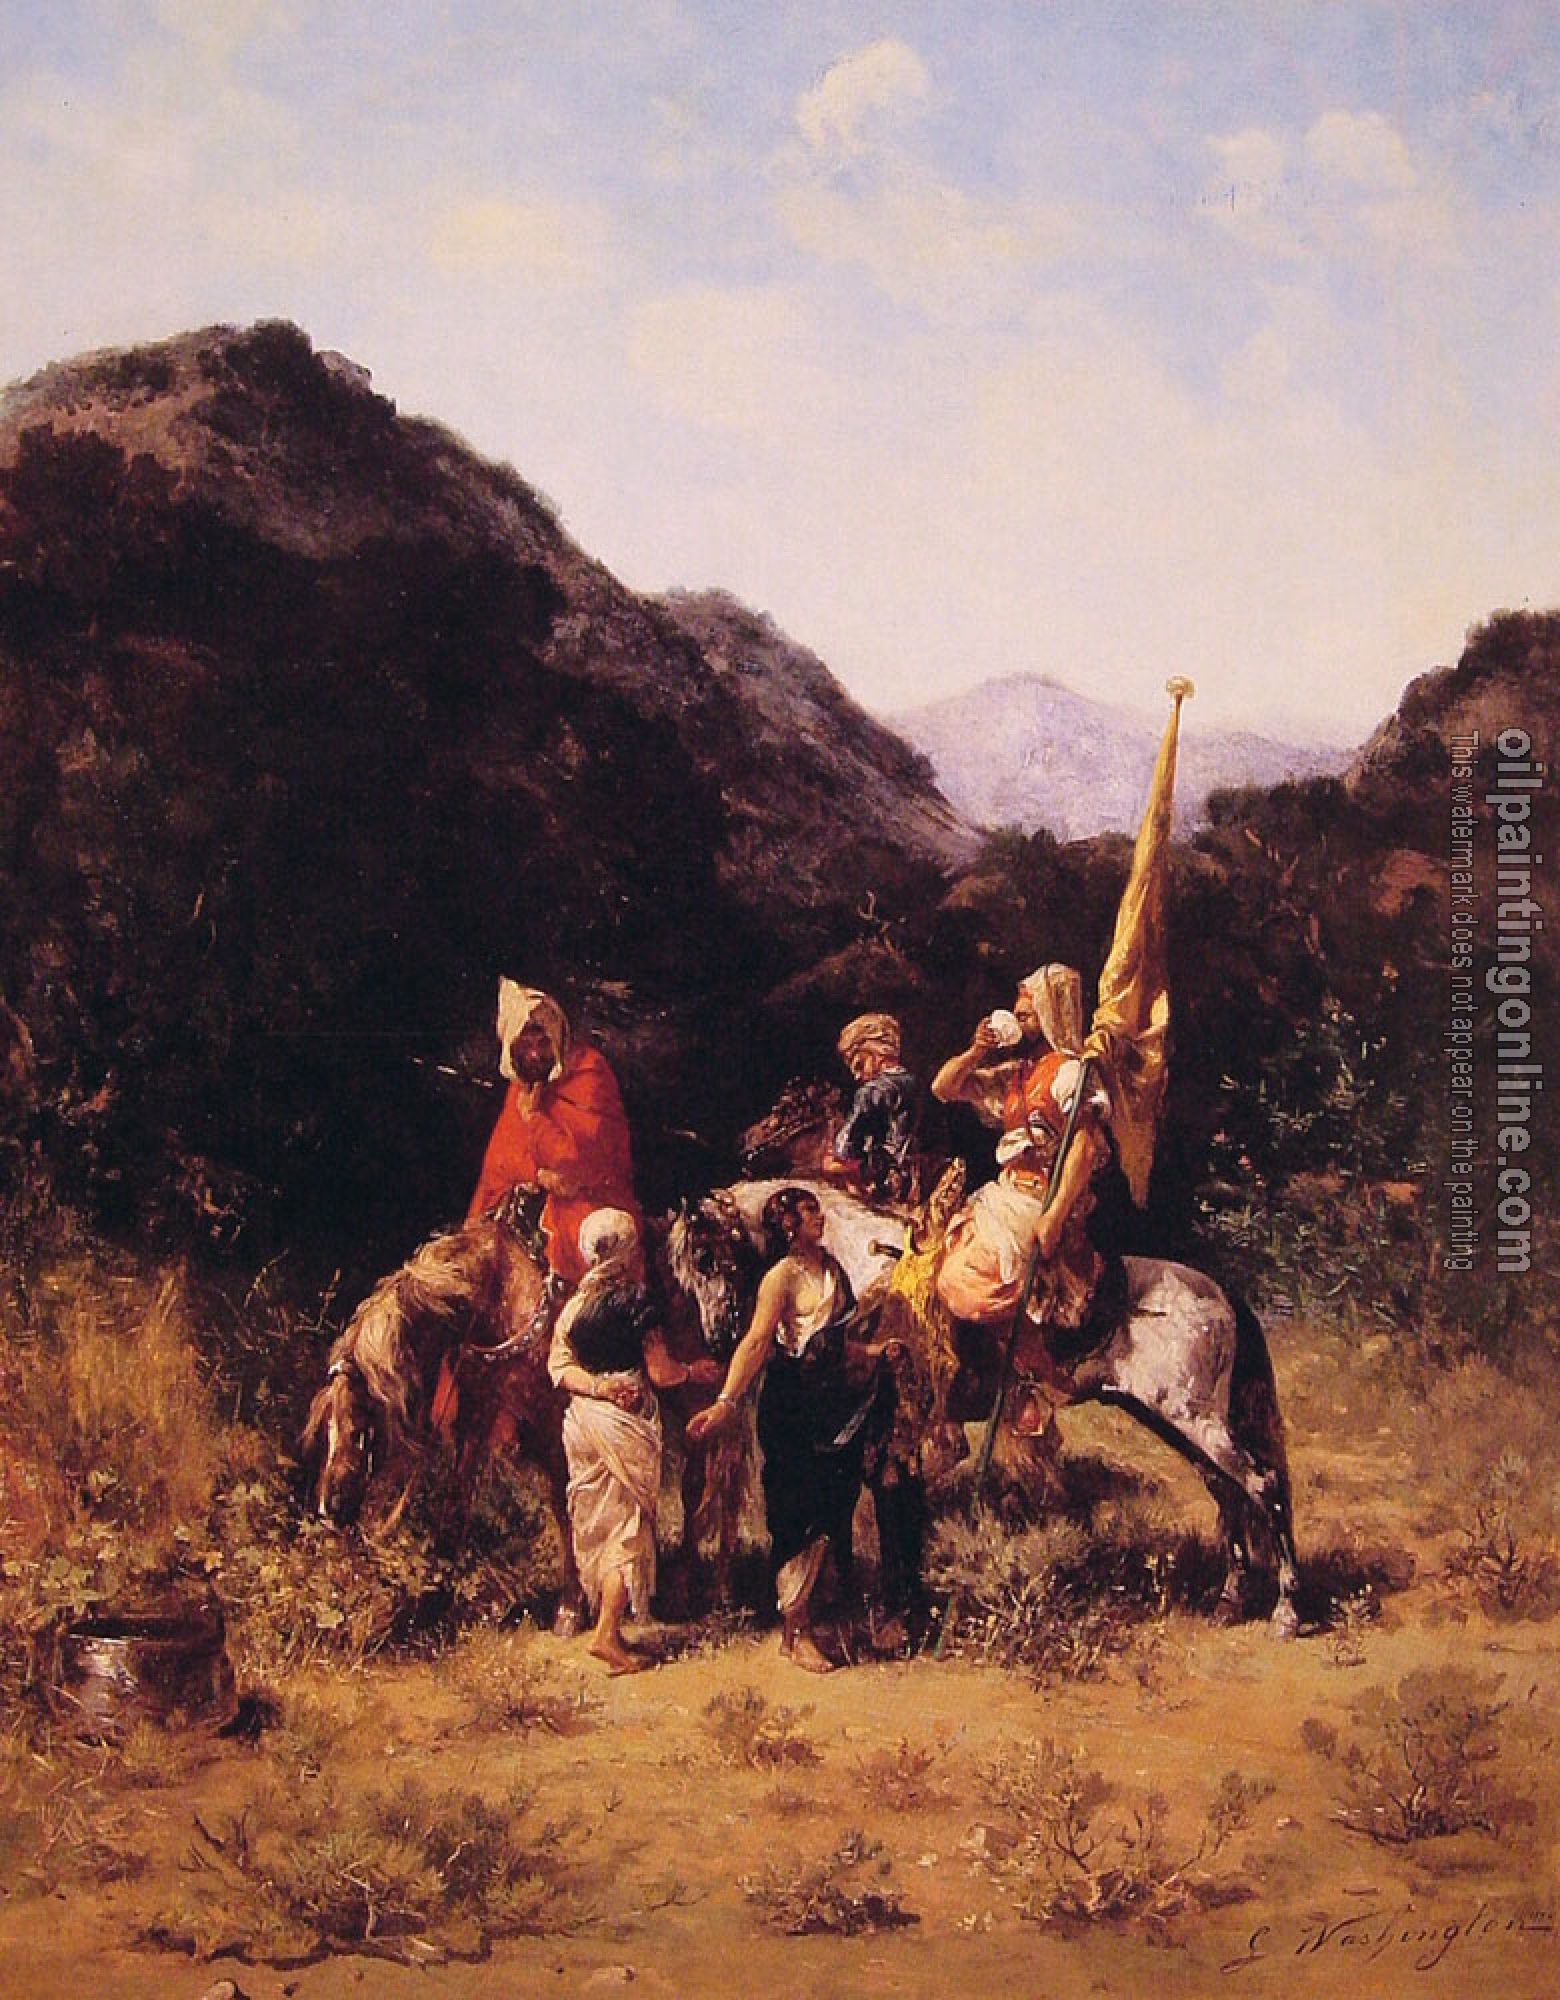 Washington, Georges - Riders in the Mountain